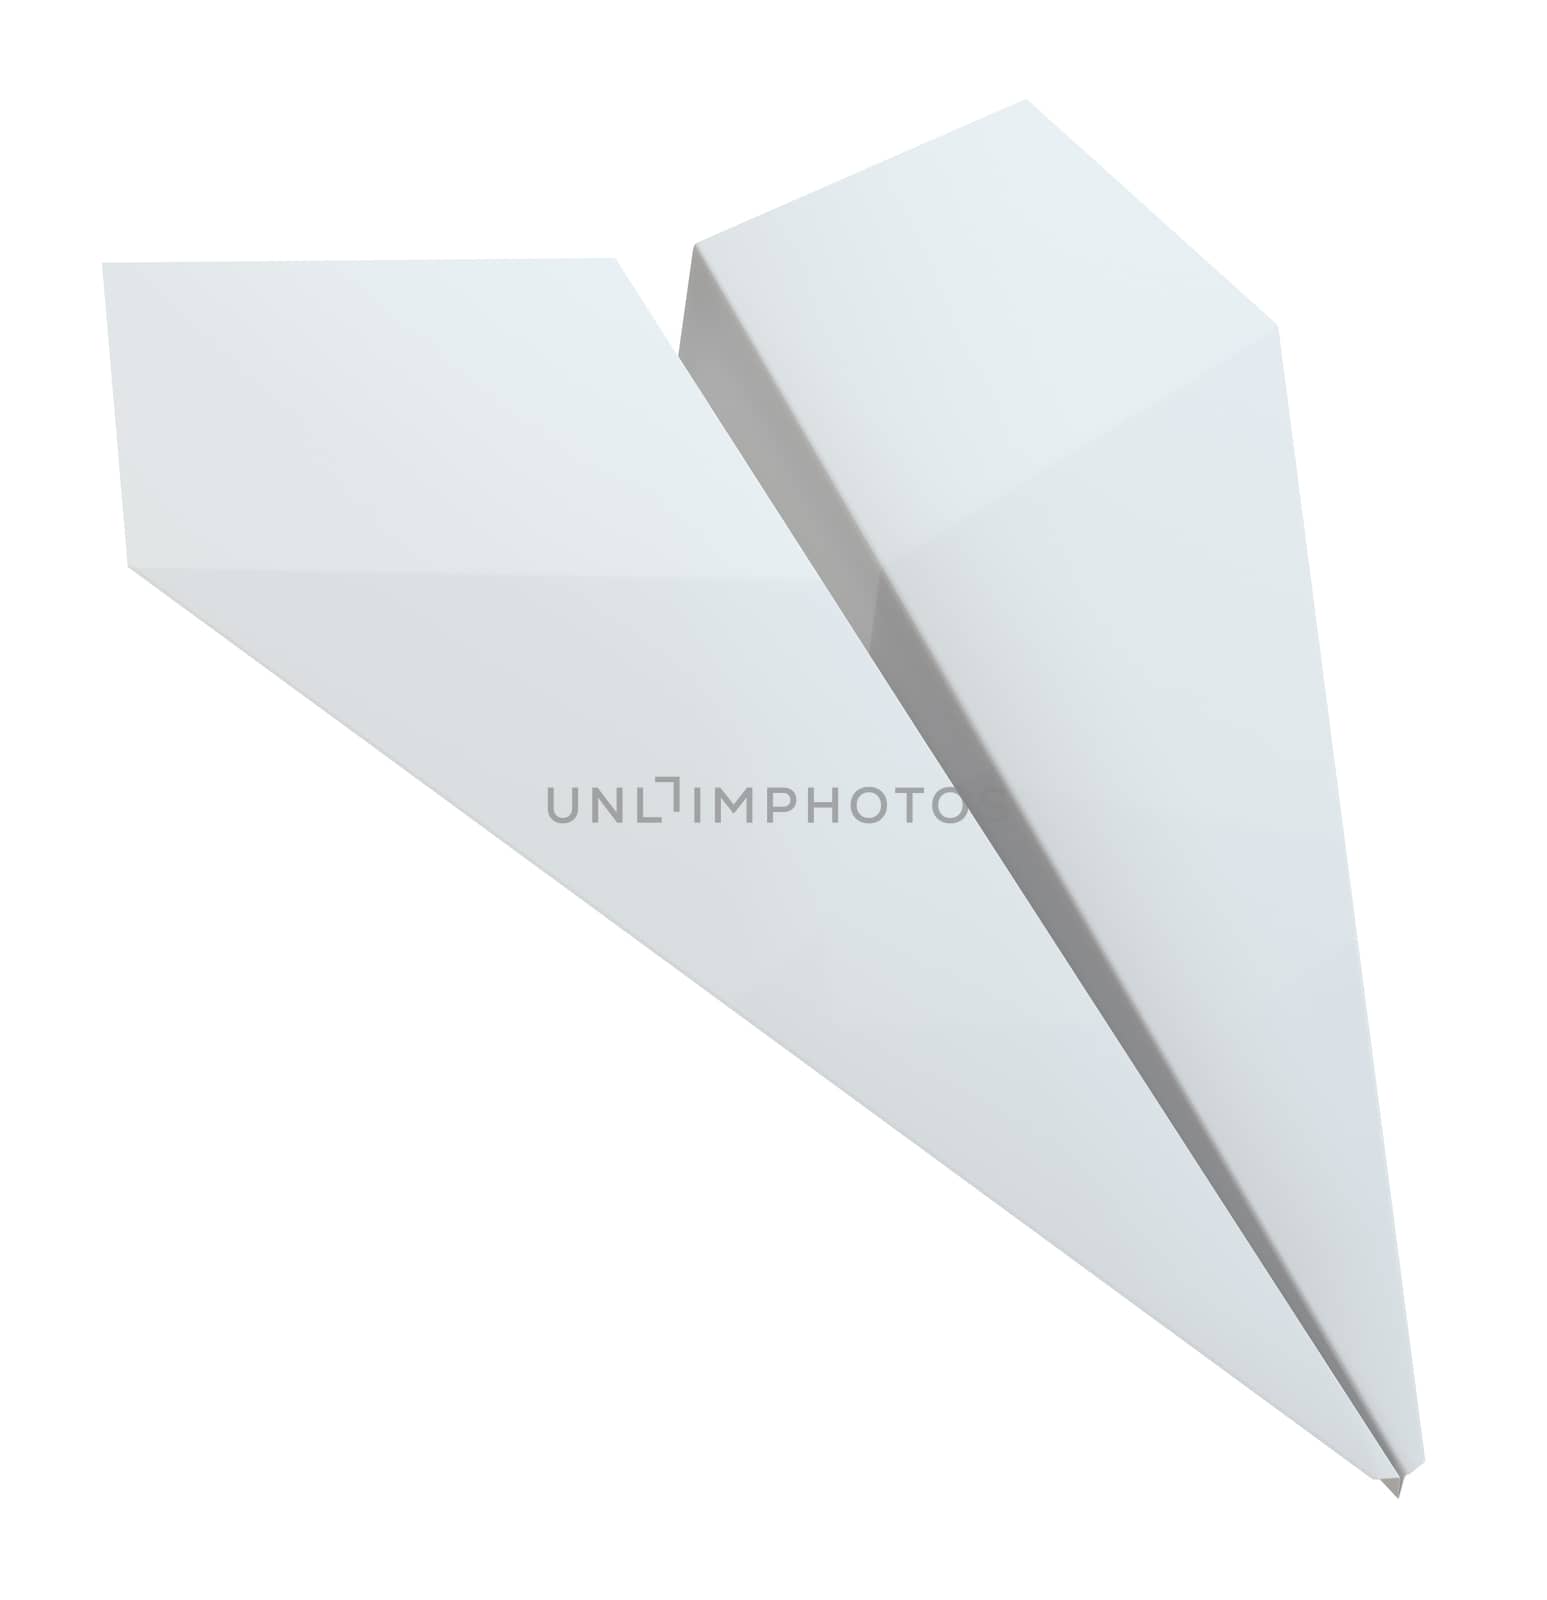 Origami paper airplane on white background by cherezoff